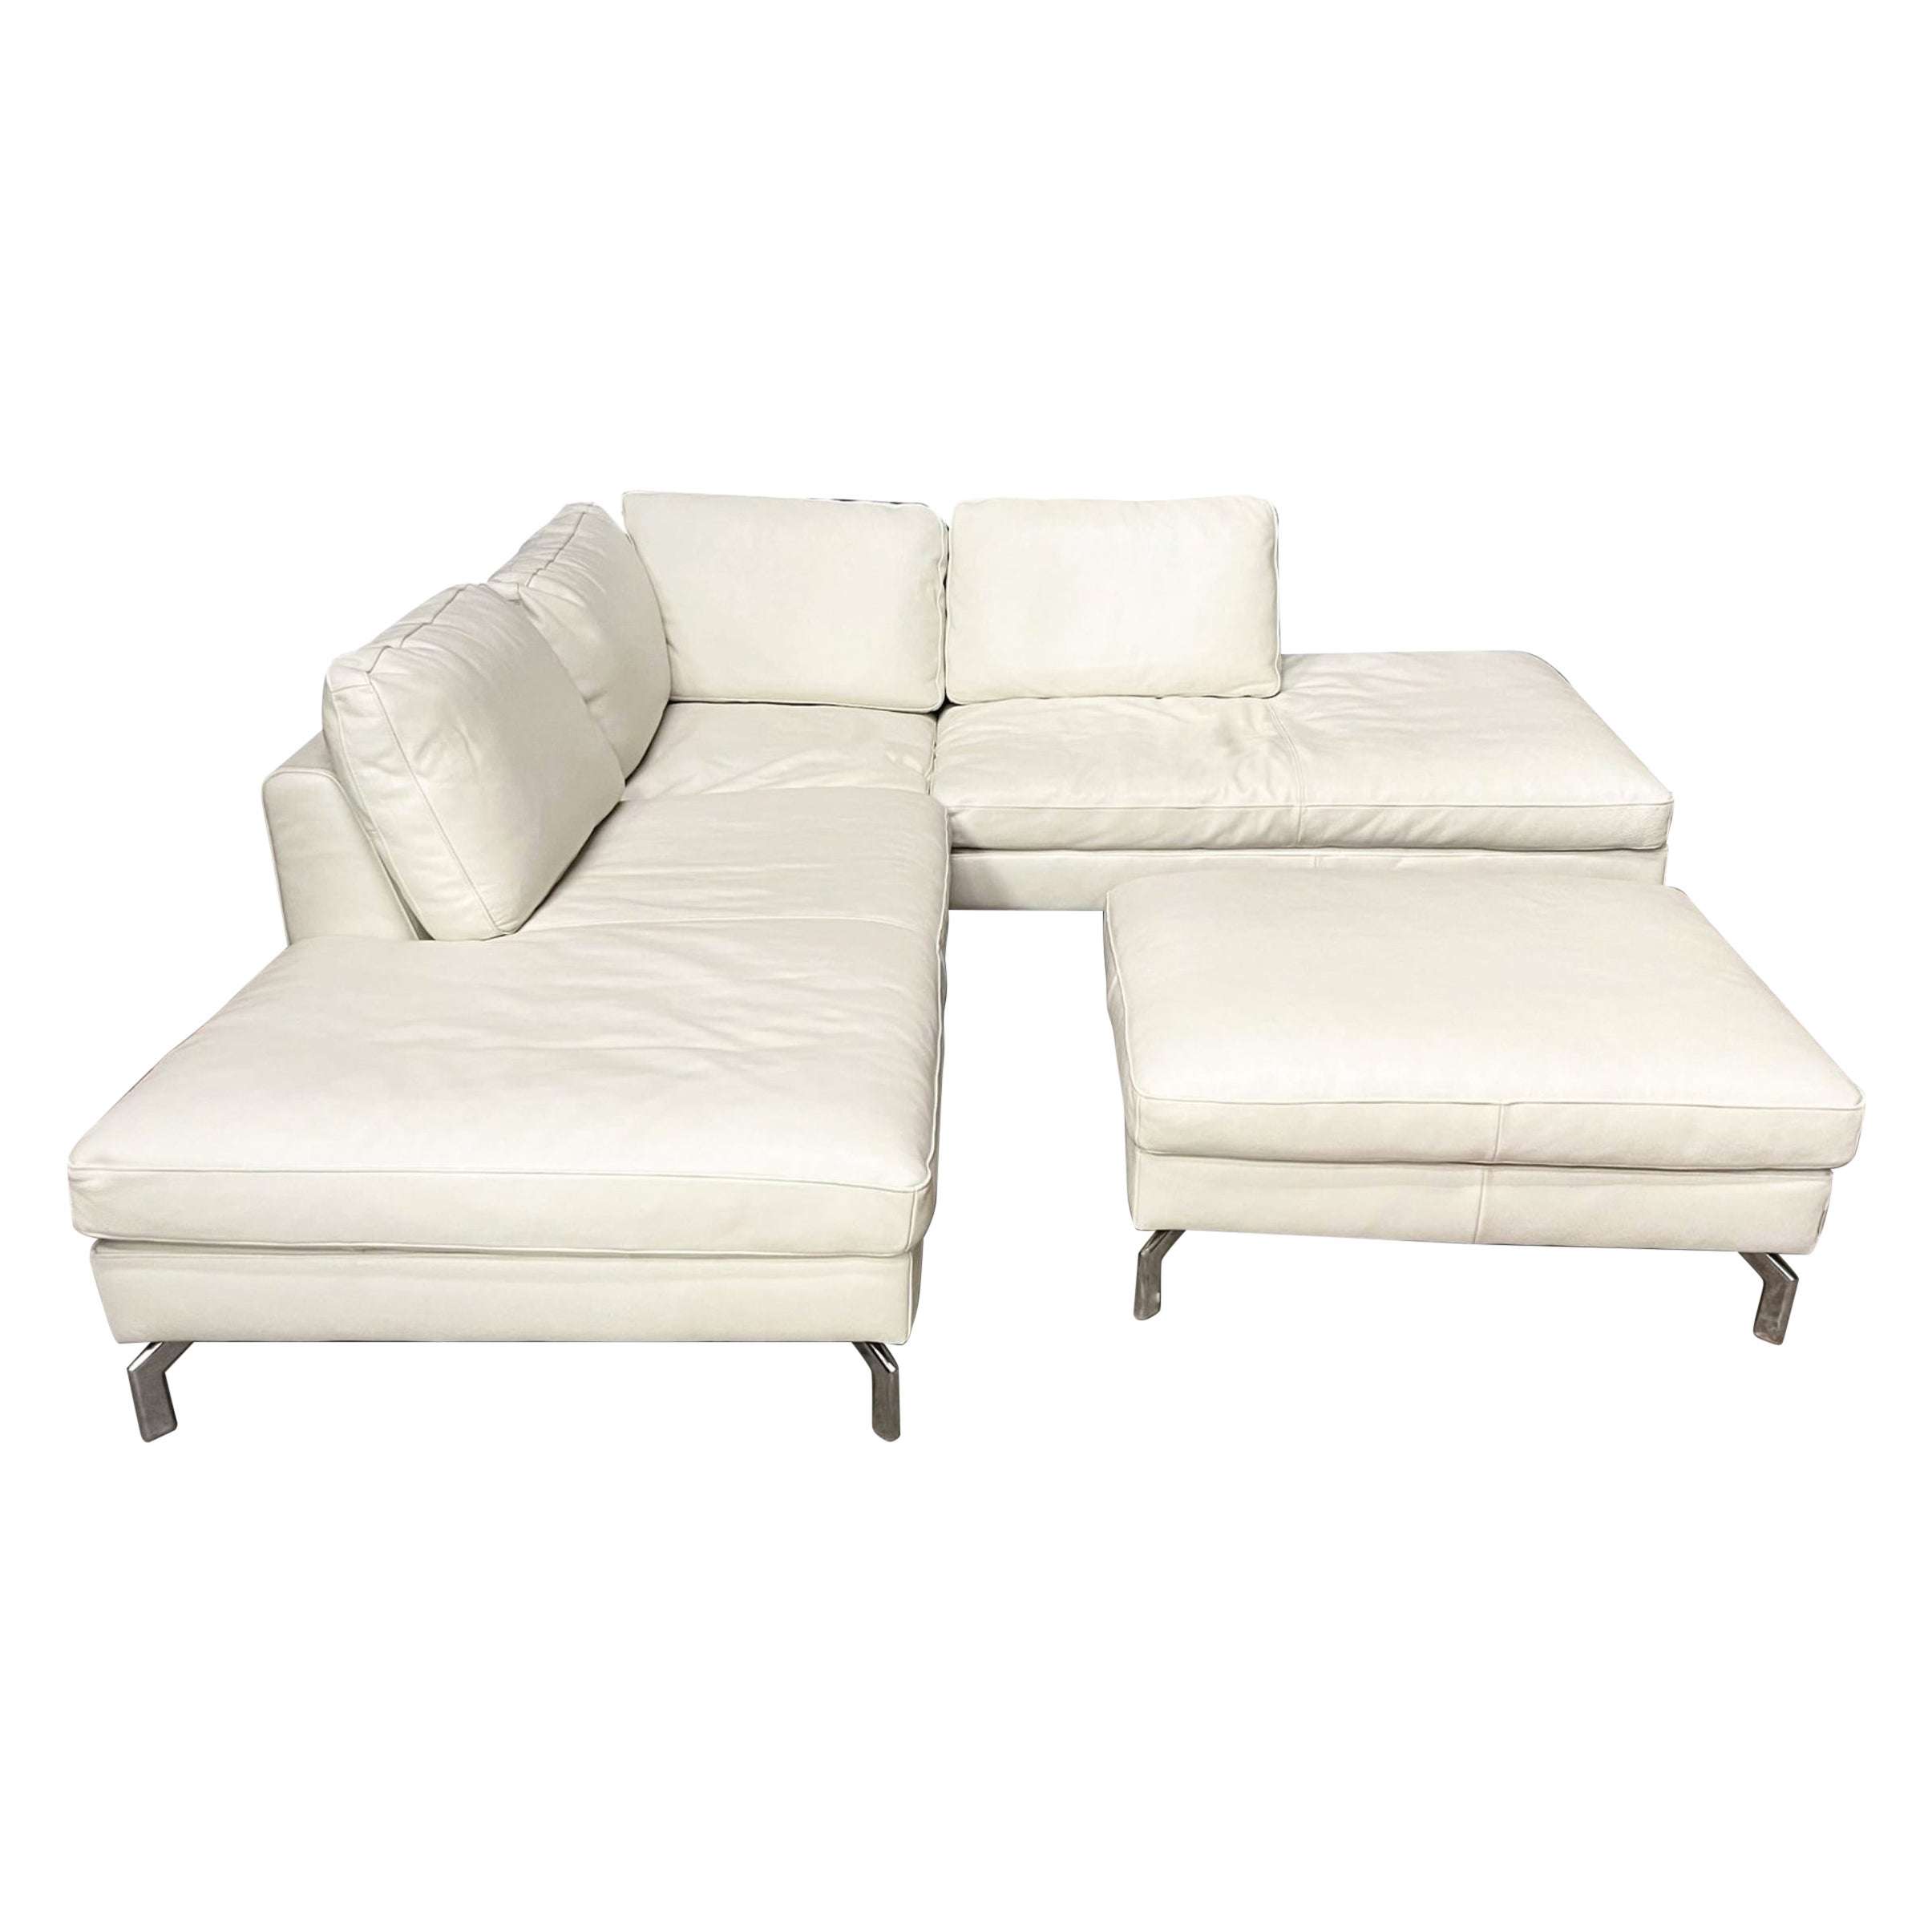 20th Century French Corner Sofa in White Genuine Leather with Chrome Legs For Sale